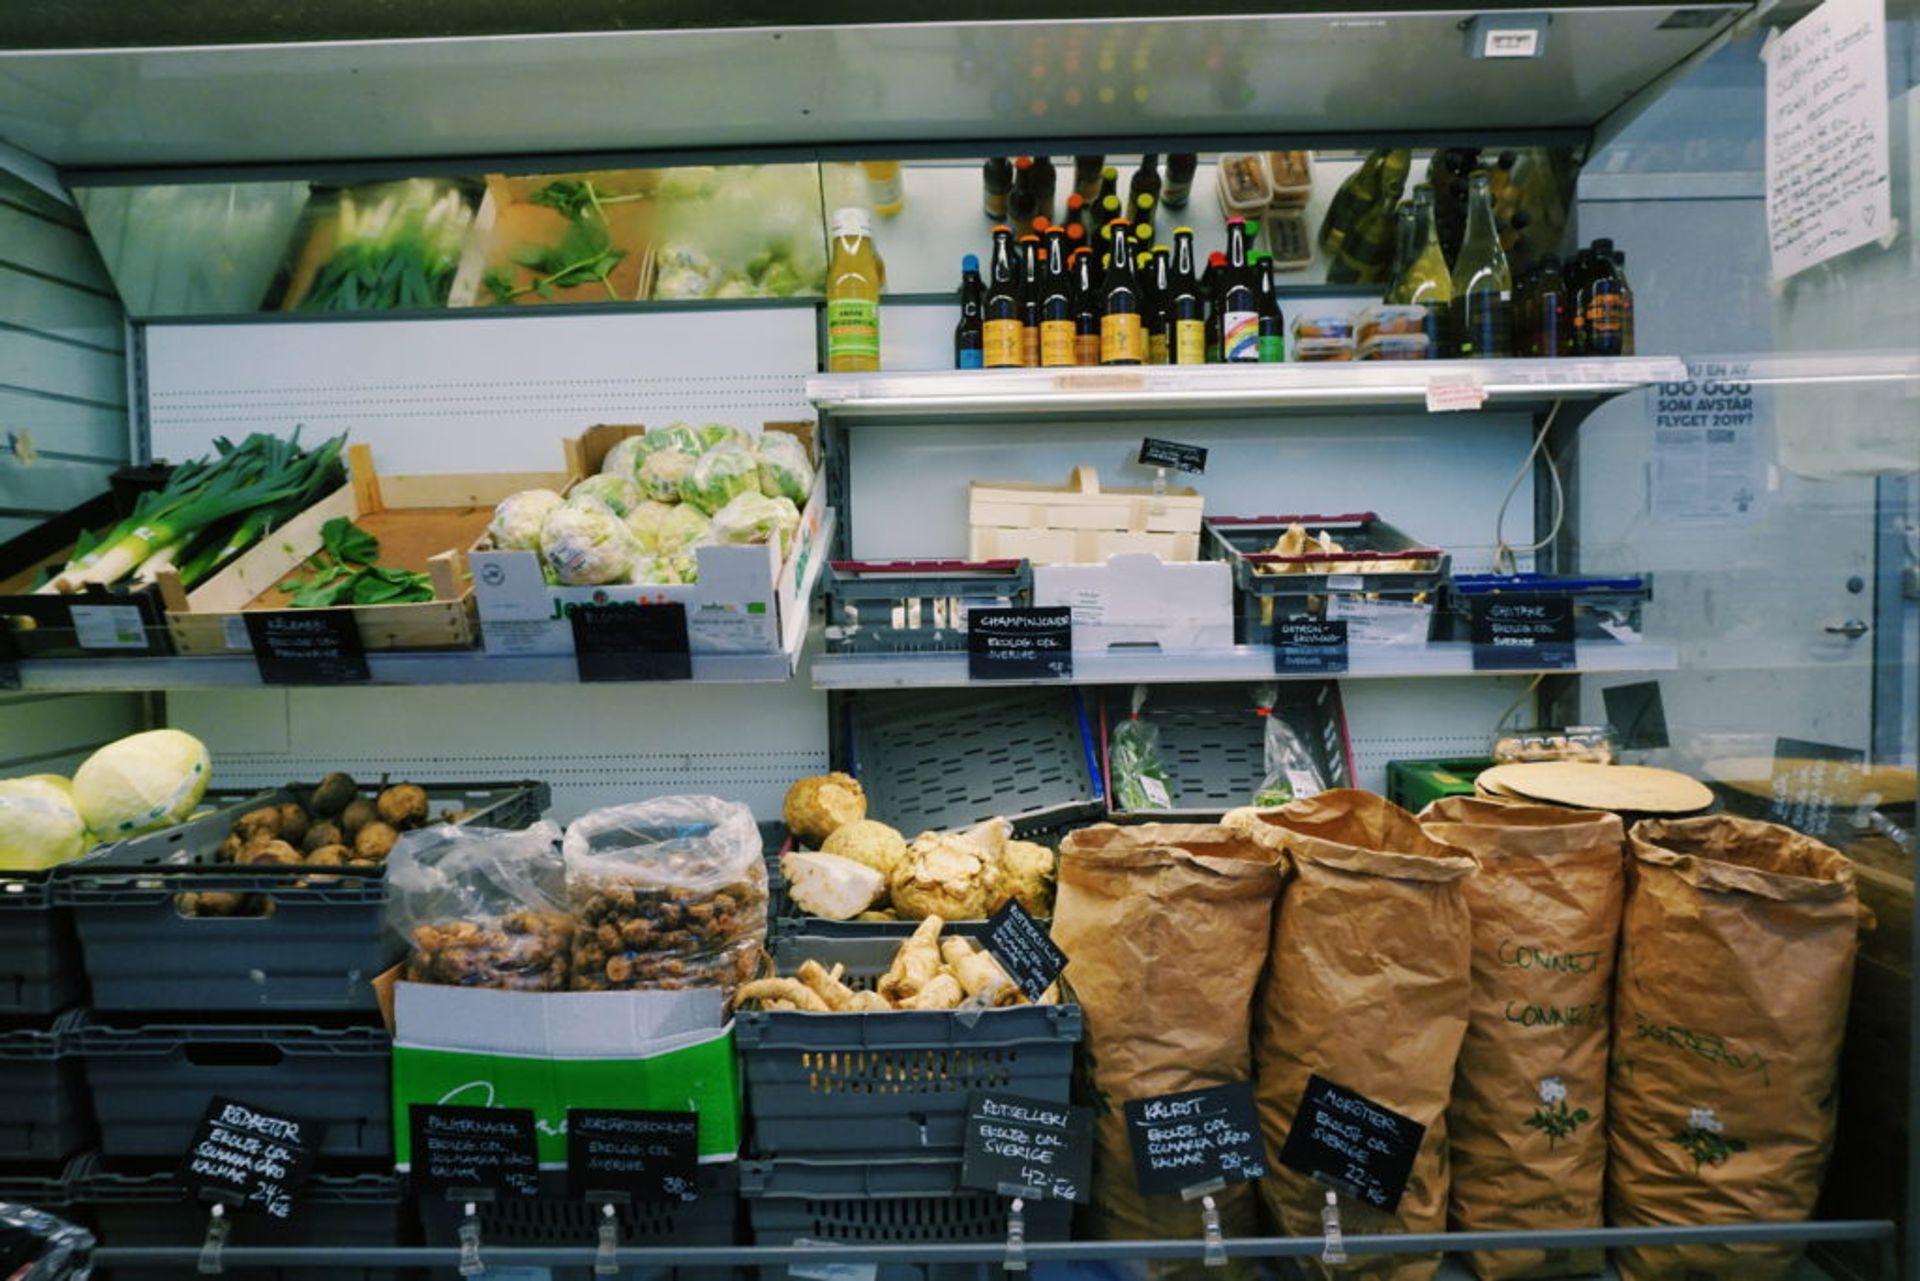 A greens department at a store, including some leek, potato, cabbage and some bottle cans.